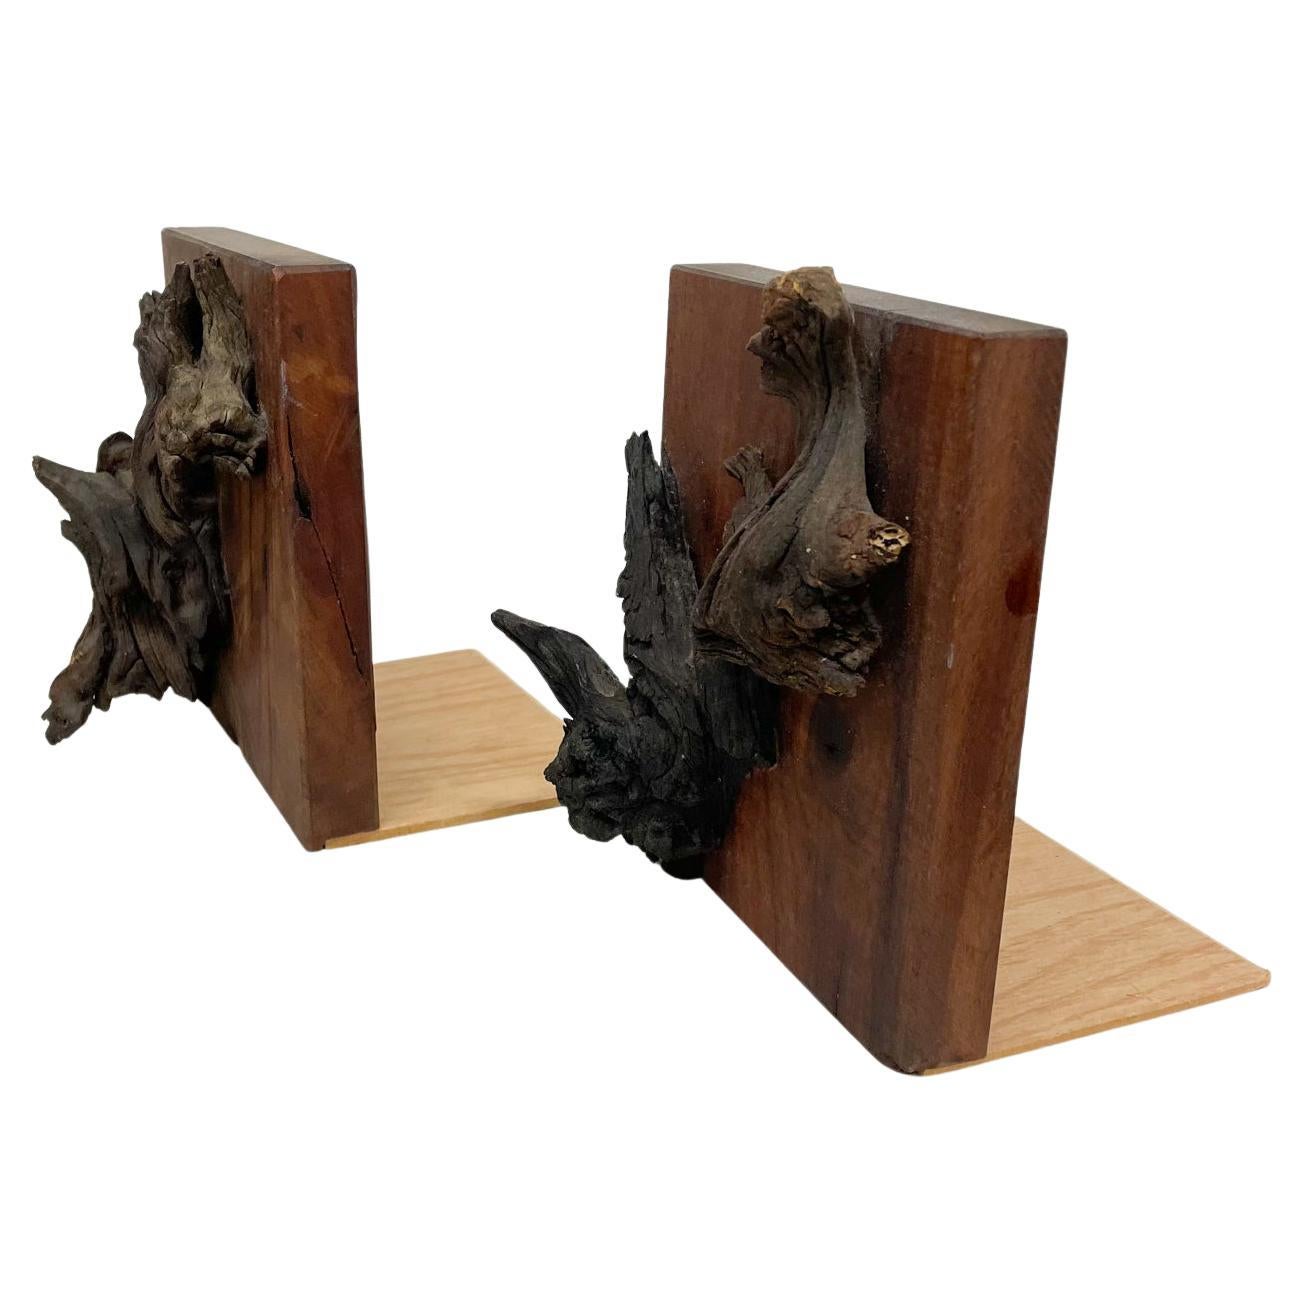 Bookends
Pair of walnut wood organic form bookends live edge natural design.
Artist signed Wetter
Original vintage unrestored preowned.
Measures: 5.75 W x 6.5 H x 6.25 D inches.
Preowned unrestored original condition
Review images provided.

